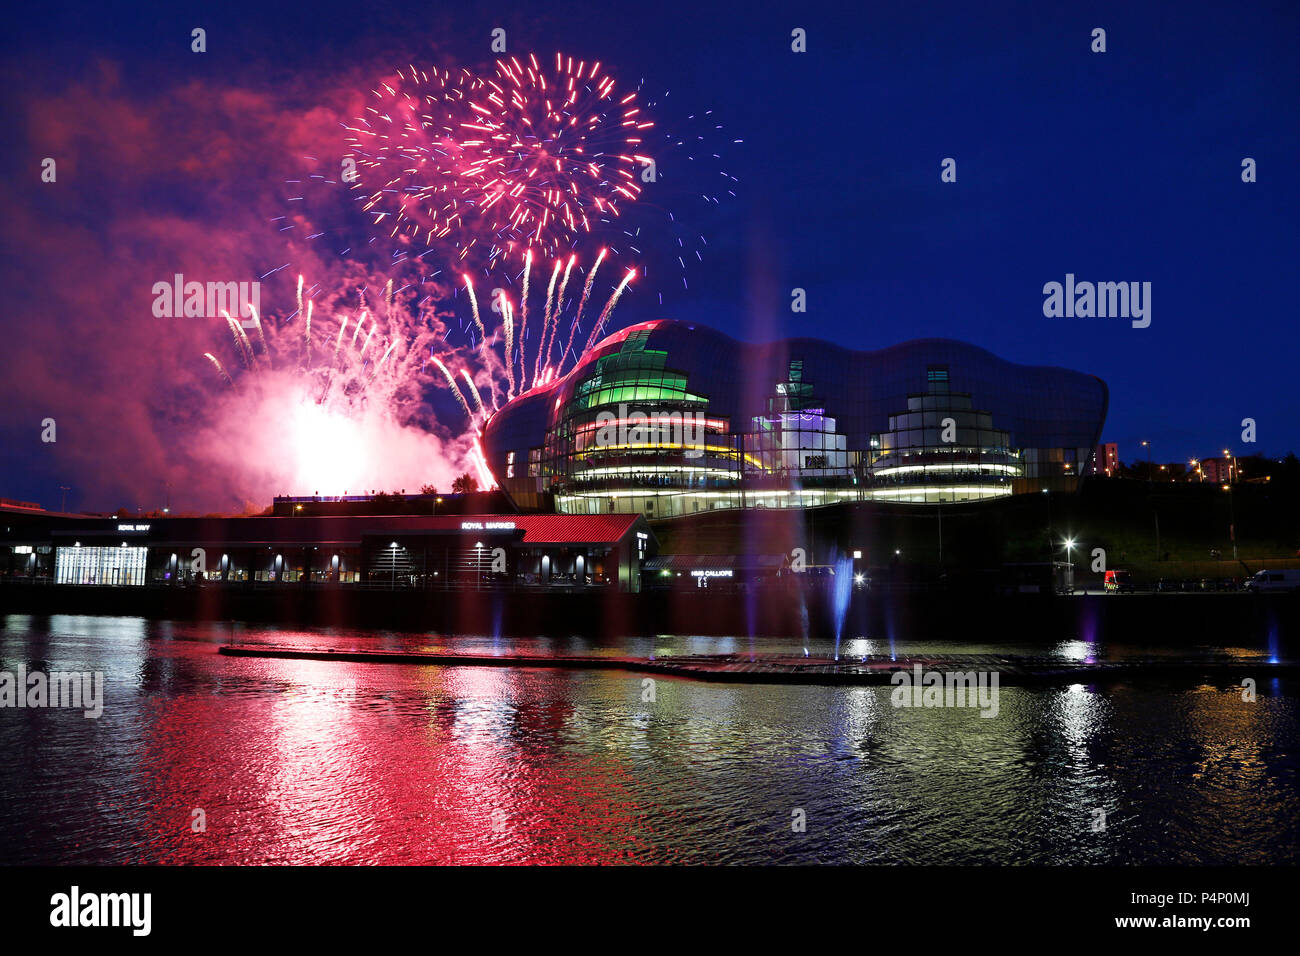 Gulerod retfærdig Kontoret Newcastle, UK. 23rd June 2018. Fireworks display during the opening  ceremony of the Great Exhibition of the North at Newcastle-upon-Tyne,  England. The 80-day festival s a celebration of innovation, industrial  heritage and